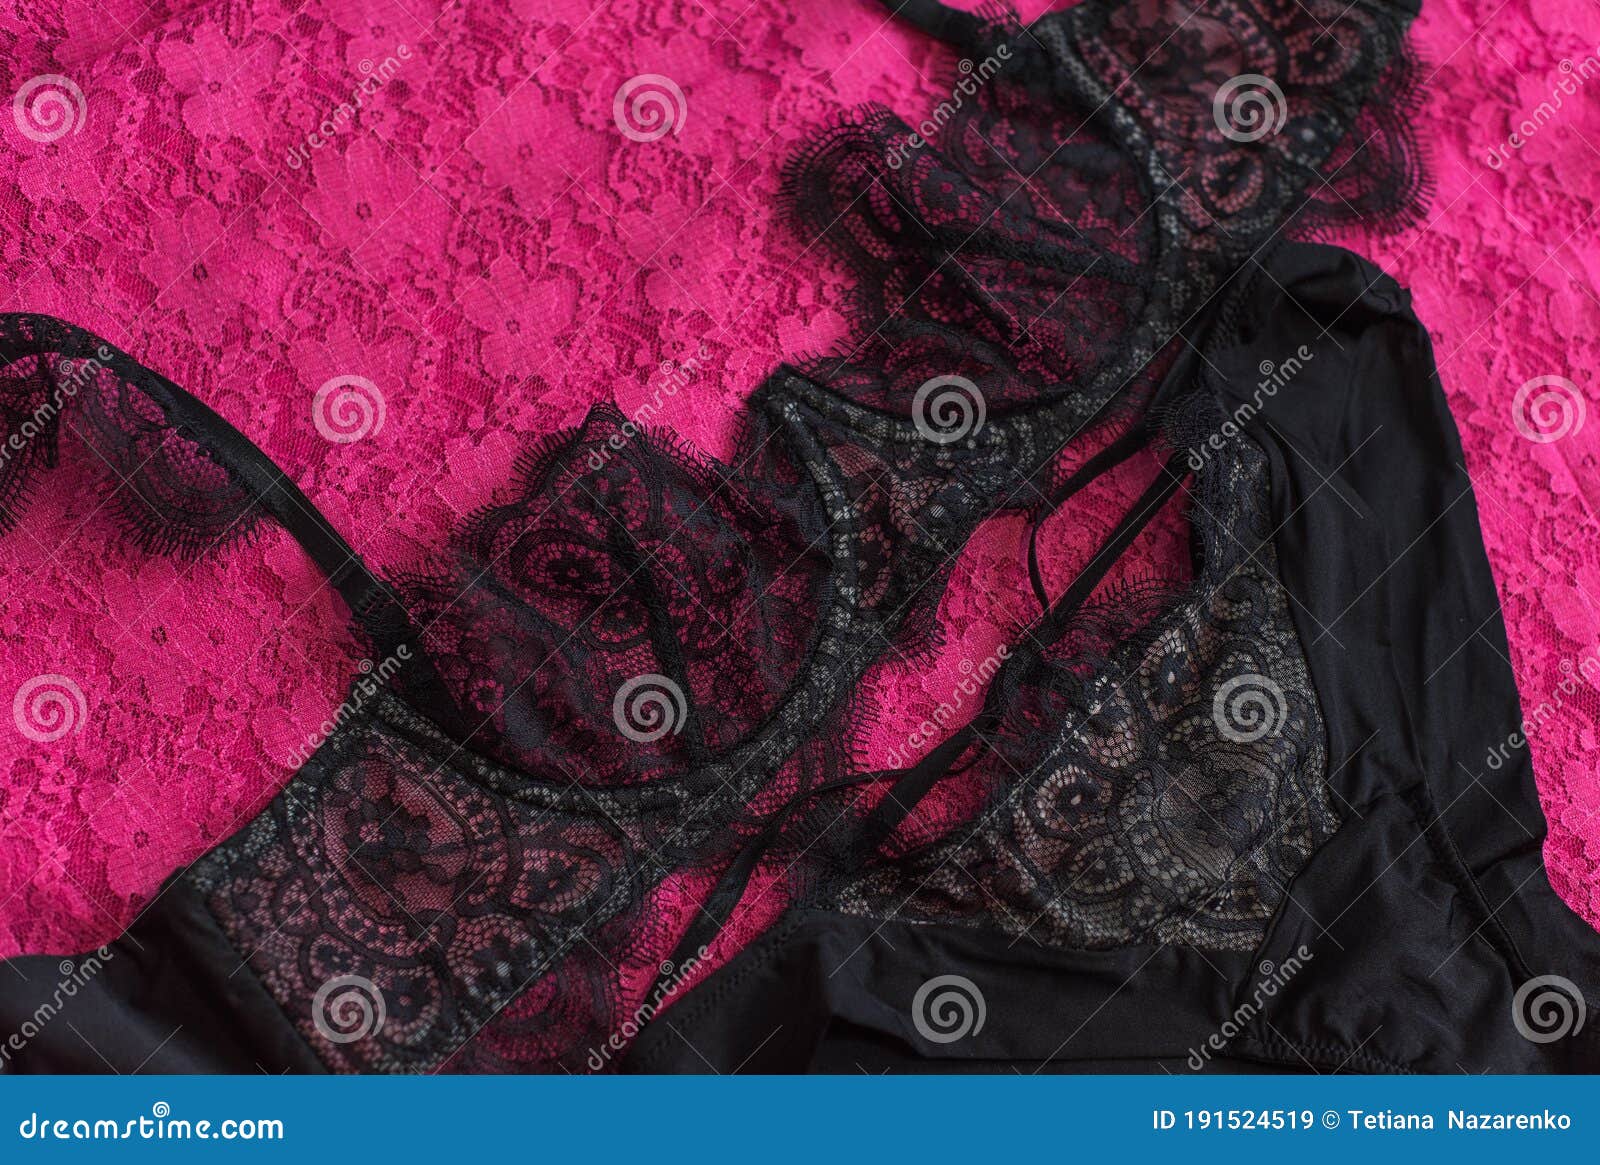 Beautifil Lingerie, Texture of Clothes Stock Image - Image of seamless ...